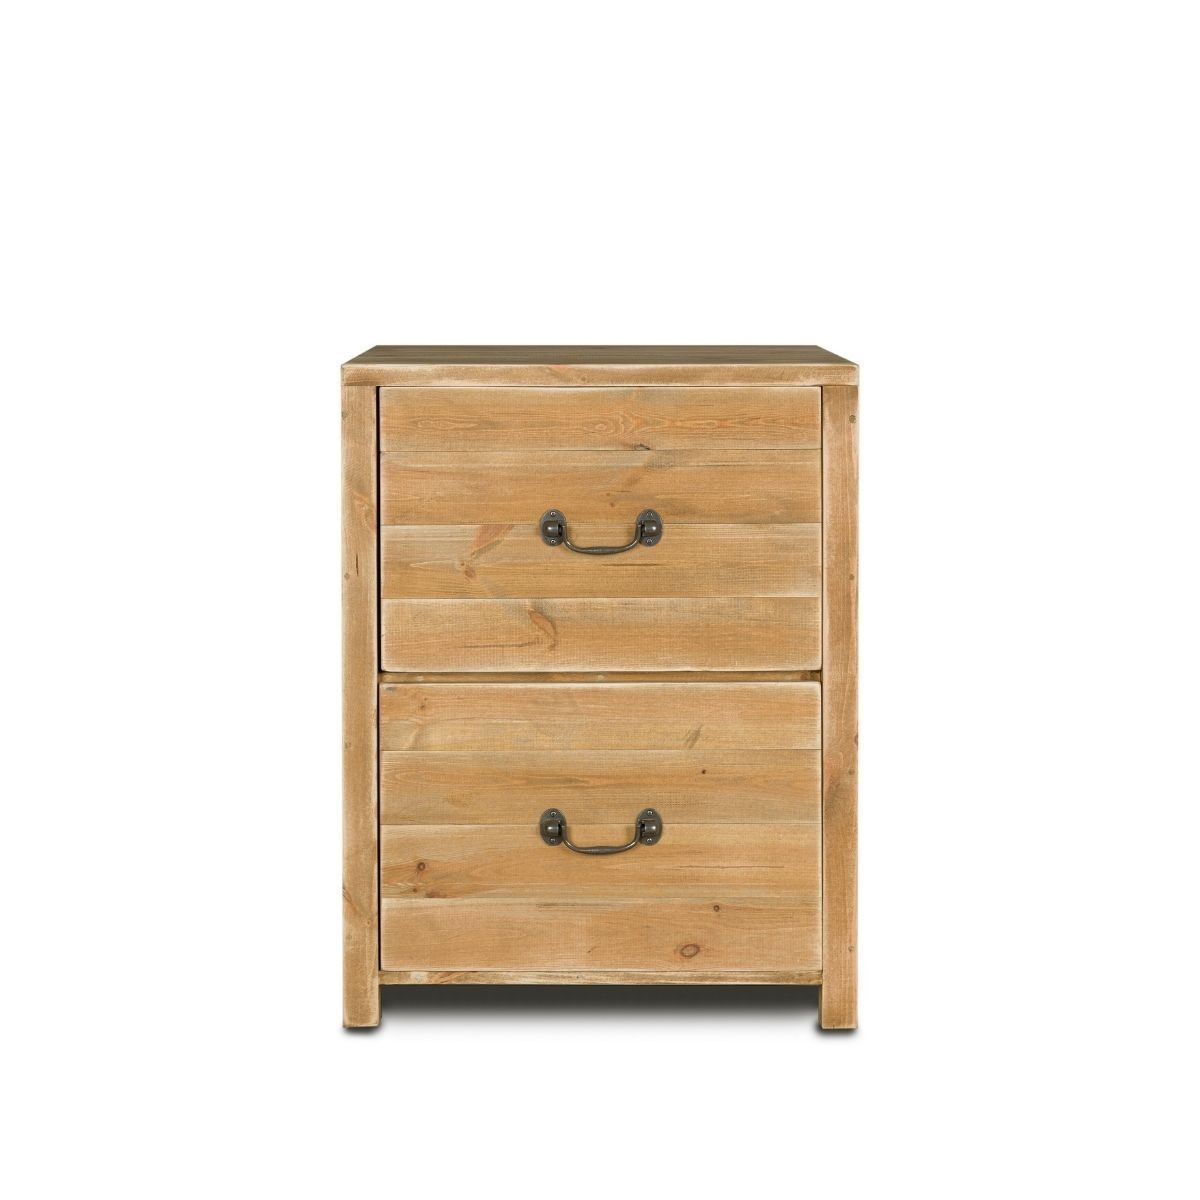 Kitchen Base Cabinet Emile 2 Drawers Solid Wood | Dendro In Wood Cabinet With Drawers (View 10 of 15)